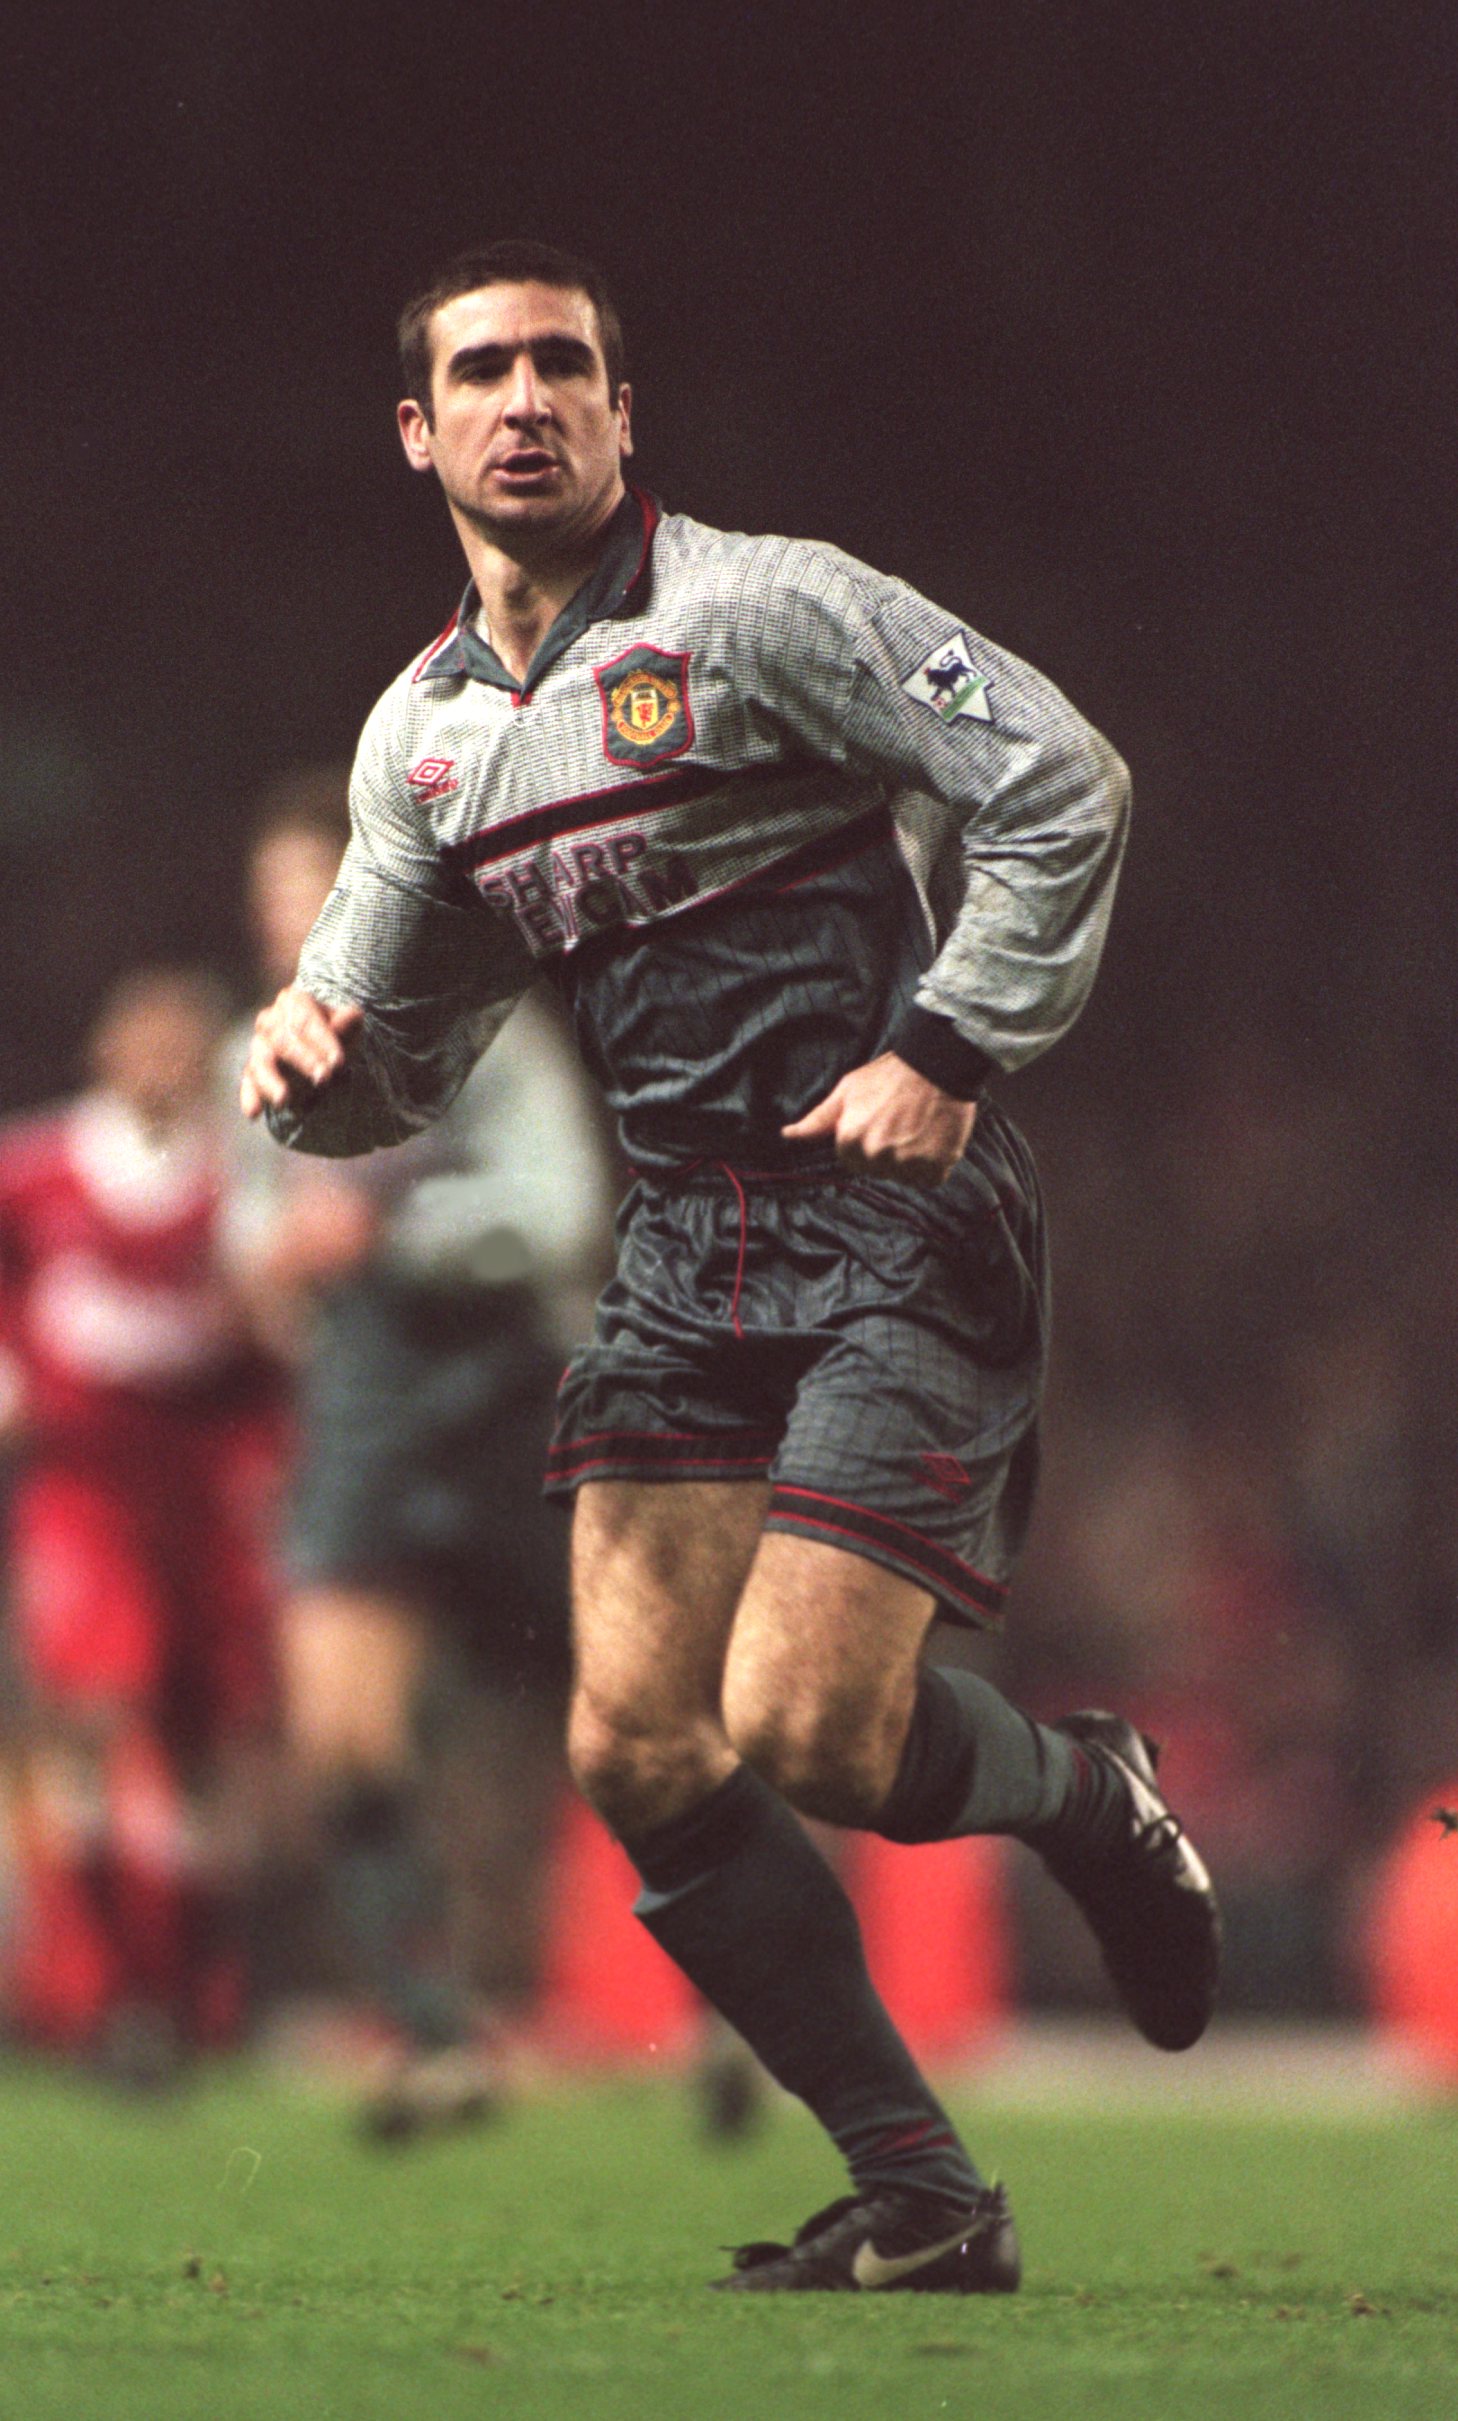 17 DEC 1995:  ERIC CANATONA OF MANCHESTER UNITED IN ACTION DURING THE LIVERPOOL V MANCHESTER UNITED FA PREMIERSHIP MATCH AT ANFIELD, LIVERPOOL. Mandatory Credit: Mark Thompson/ALLSPORT